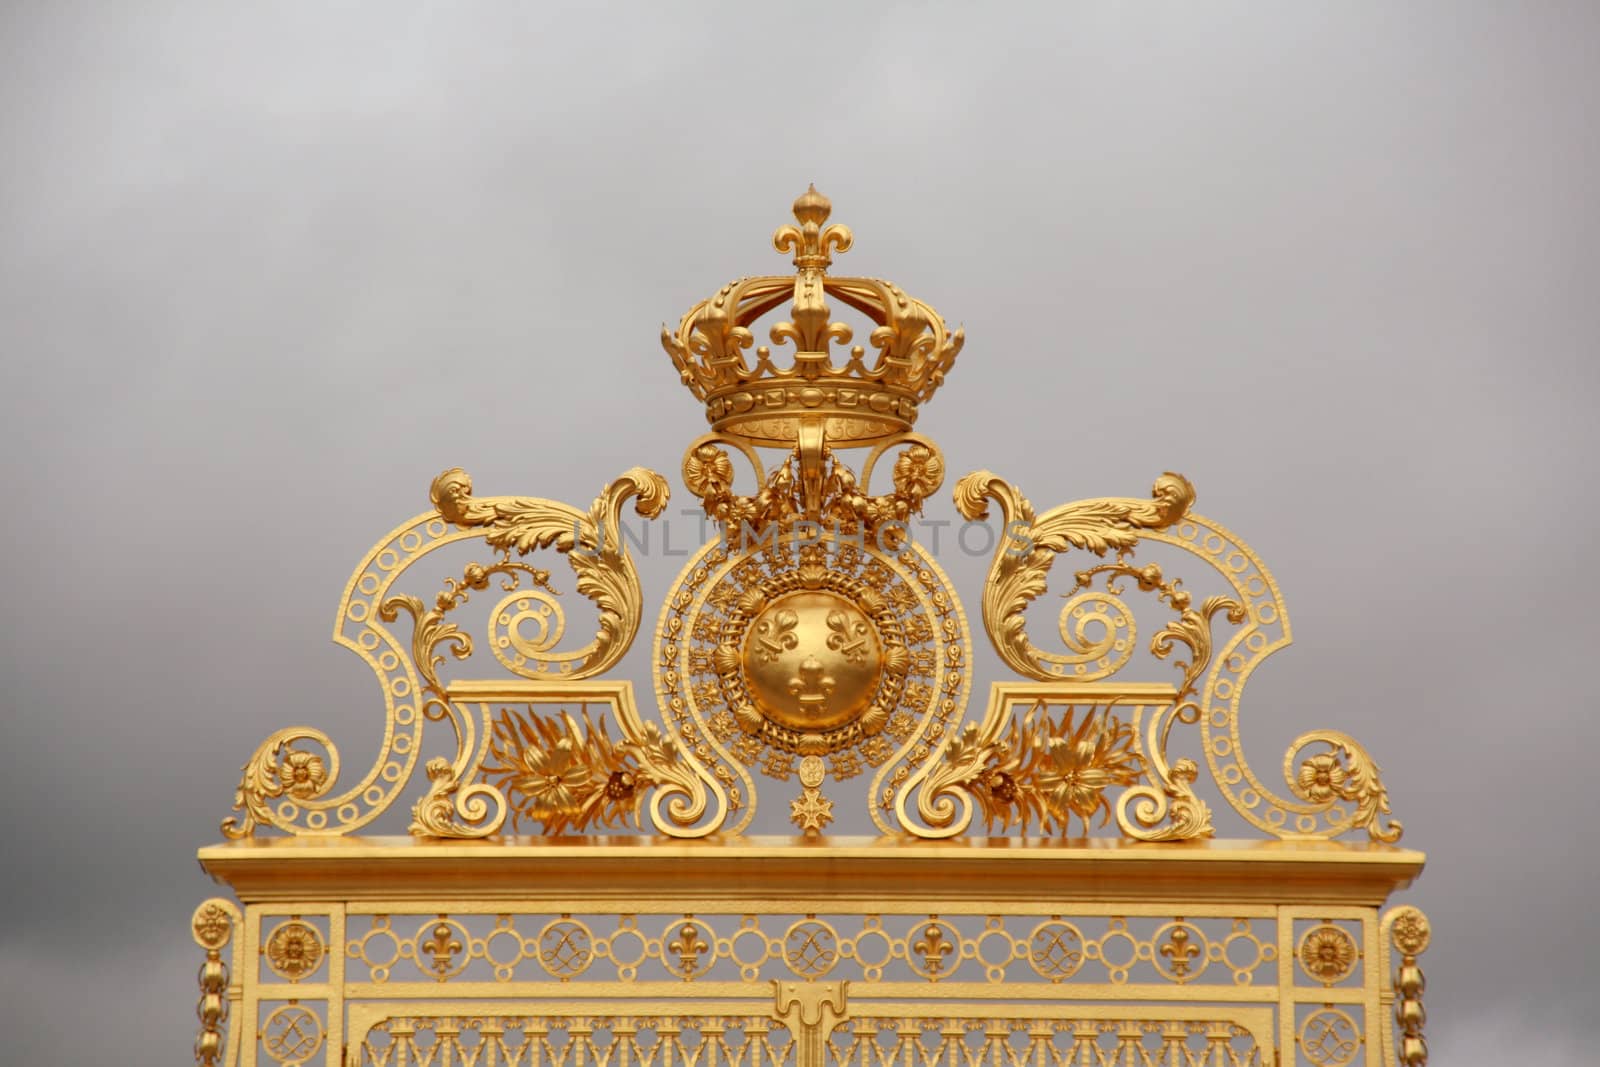 Park and Palace Chateau de Versailles. France. A fragment of the central gate with the royal crown and fleur lily